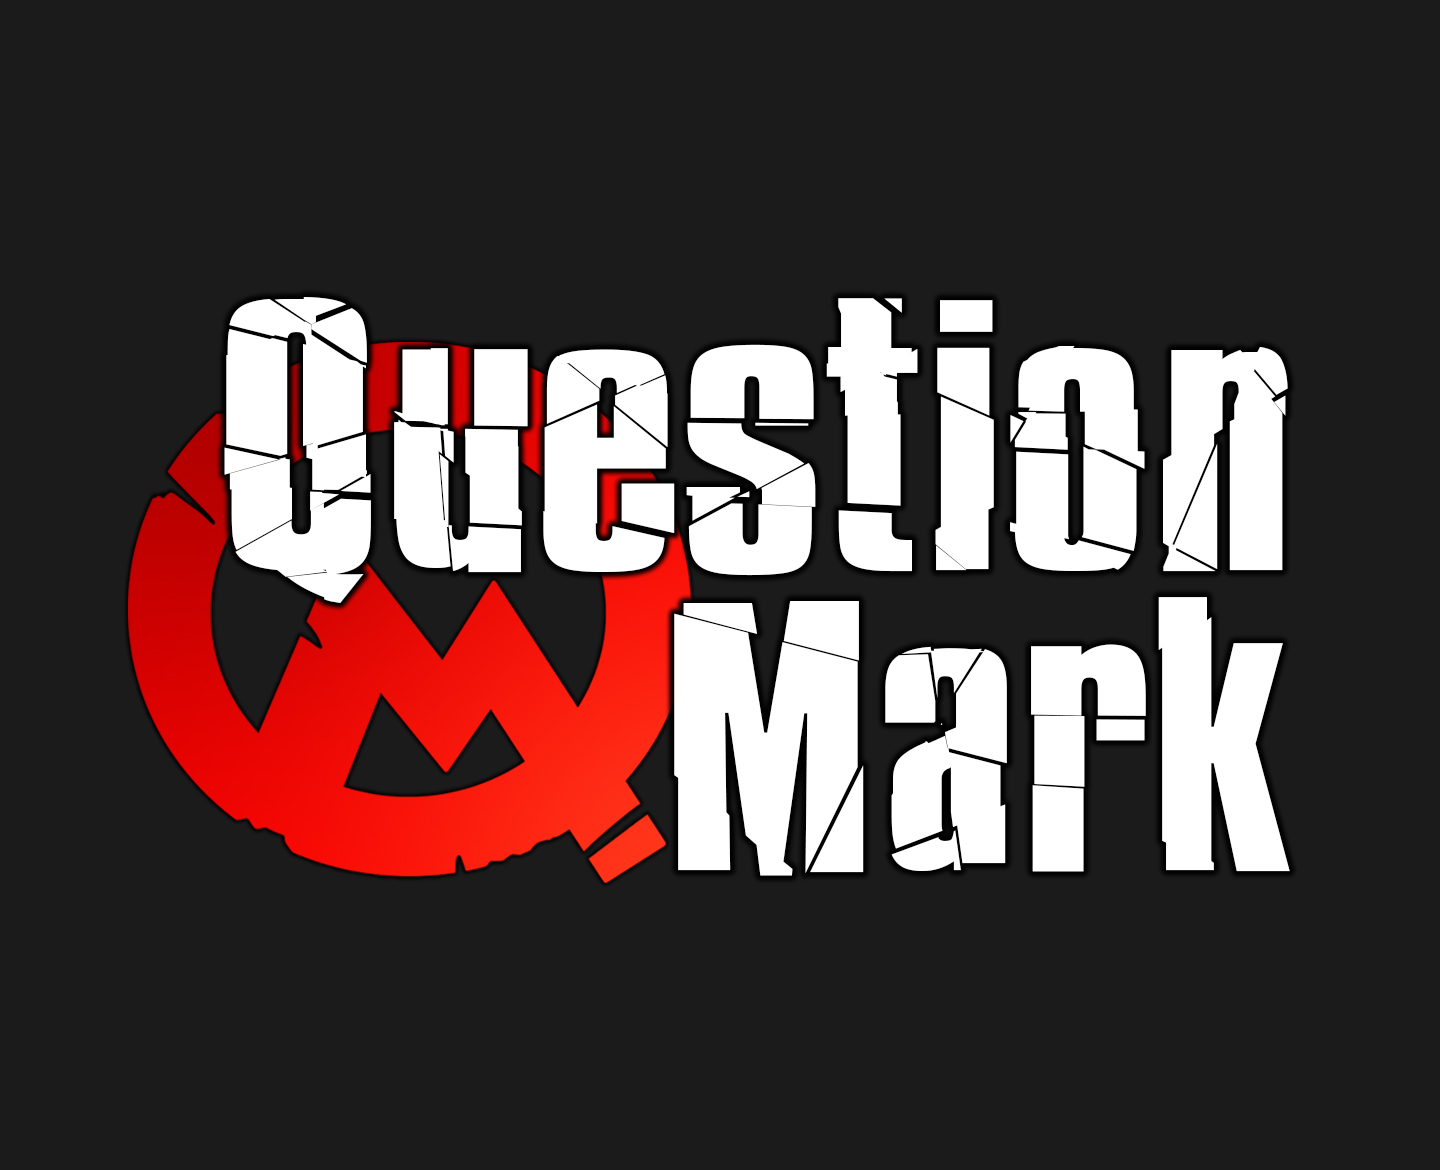 Question Mark